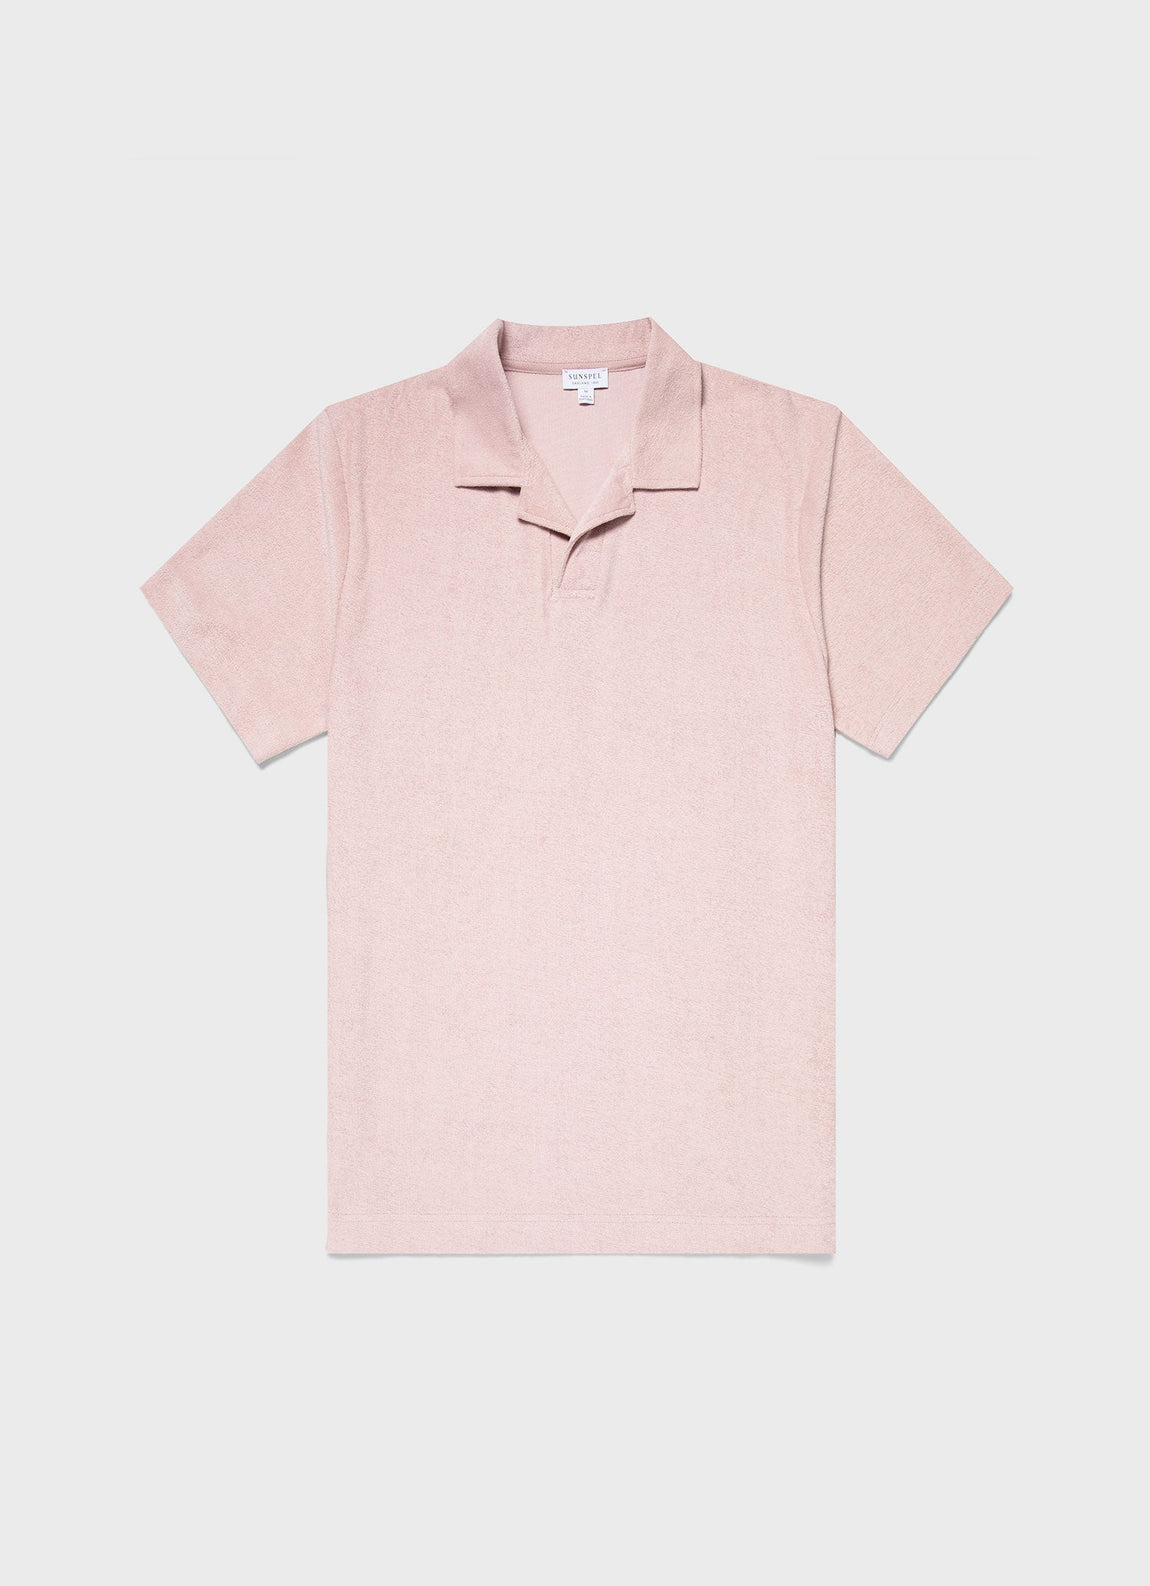 Men's Towelling Polo Shirt in Pale Pink